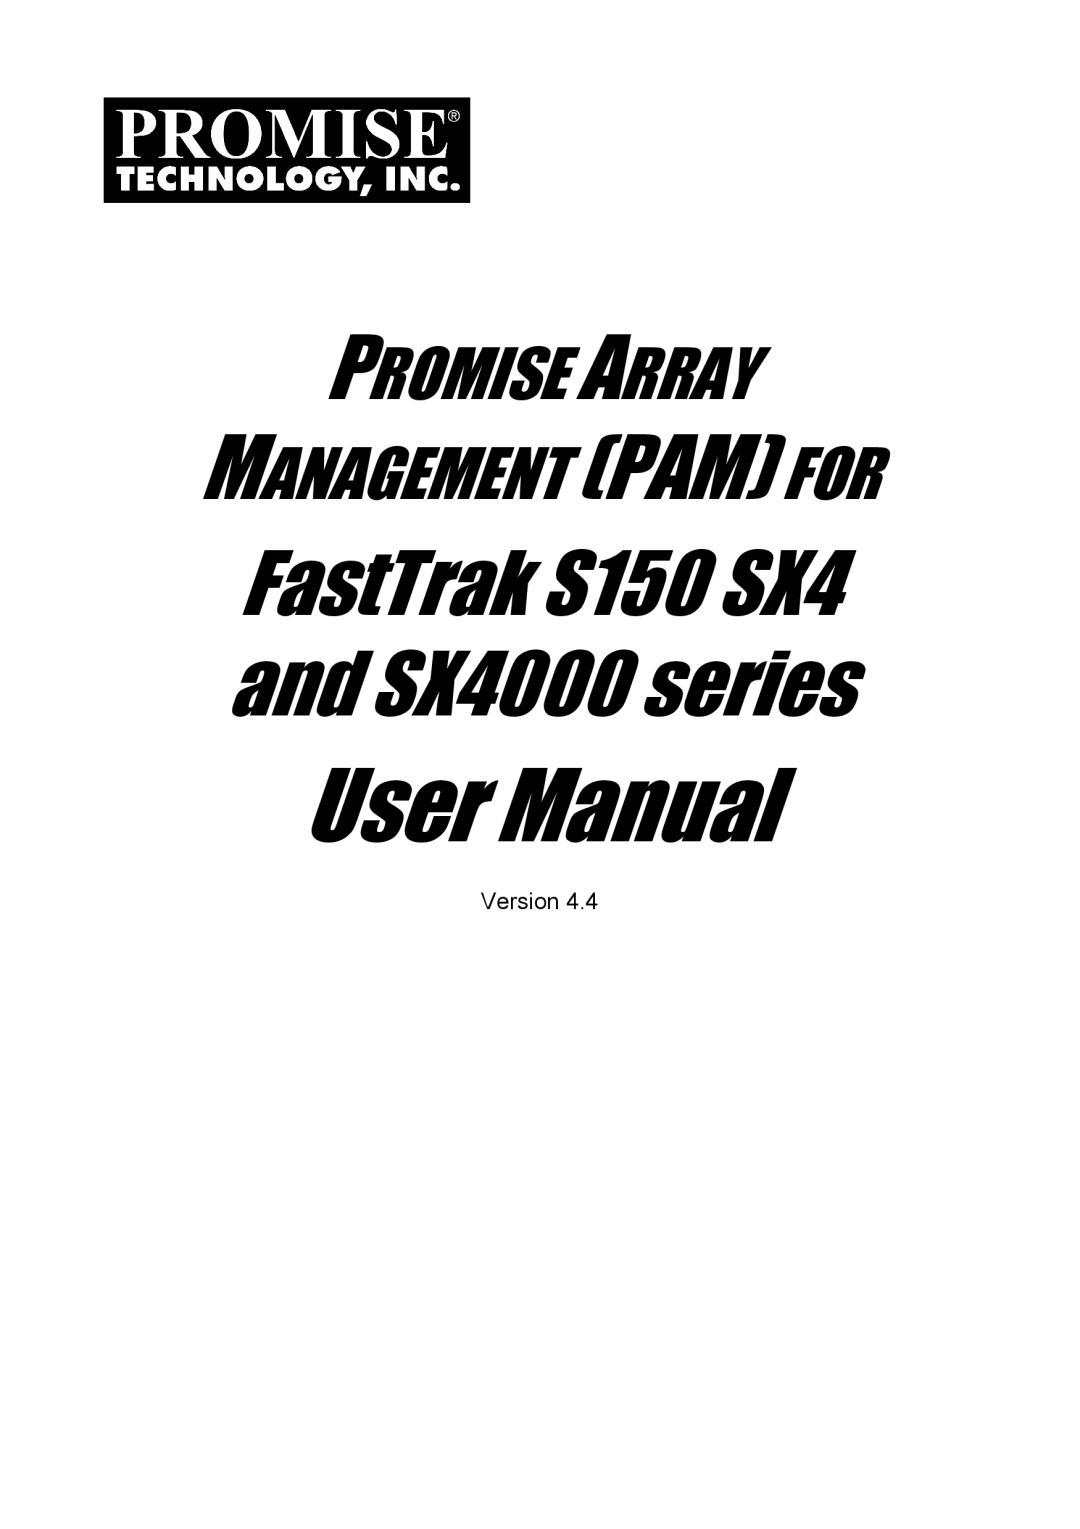 Promise Technology Version 4.4 user manual FastTrak S150 SX4 and SX4000 series 